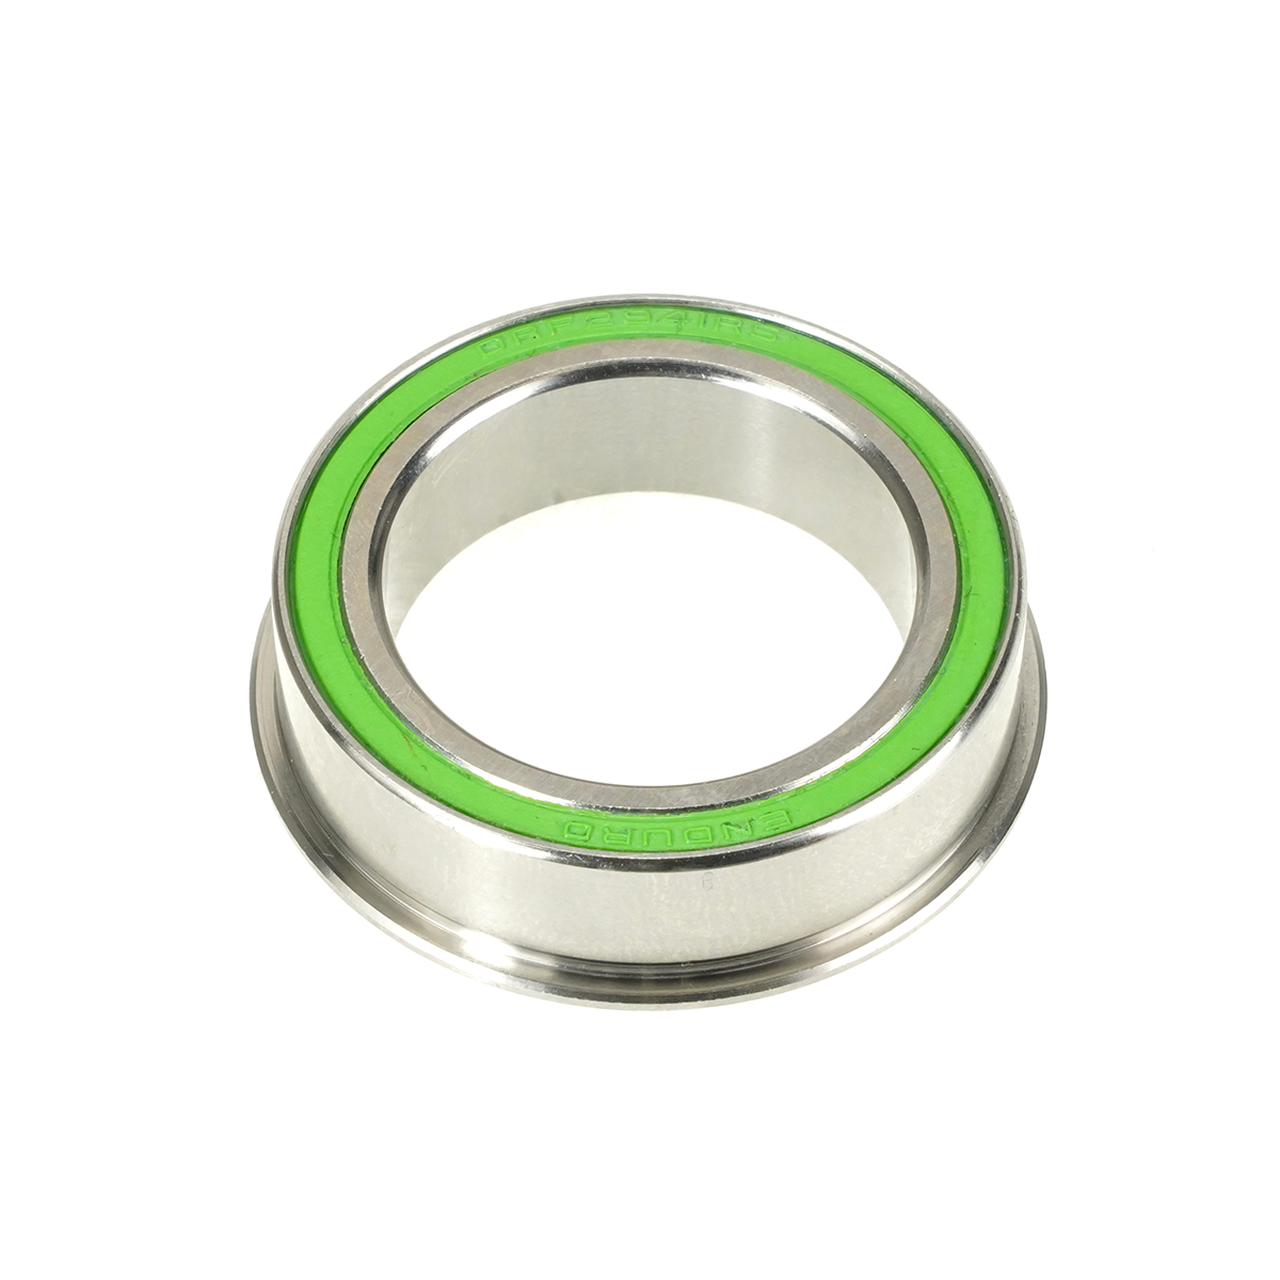 Enduro DRF 2941 2RS SS - Flanged, Double-Row, Press-In, Bottom Bracket bearing - 30mm x 41/44mm x 11mm